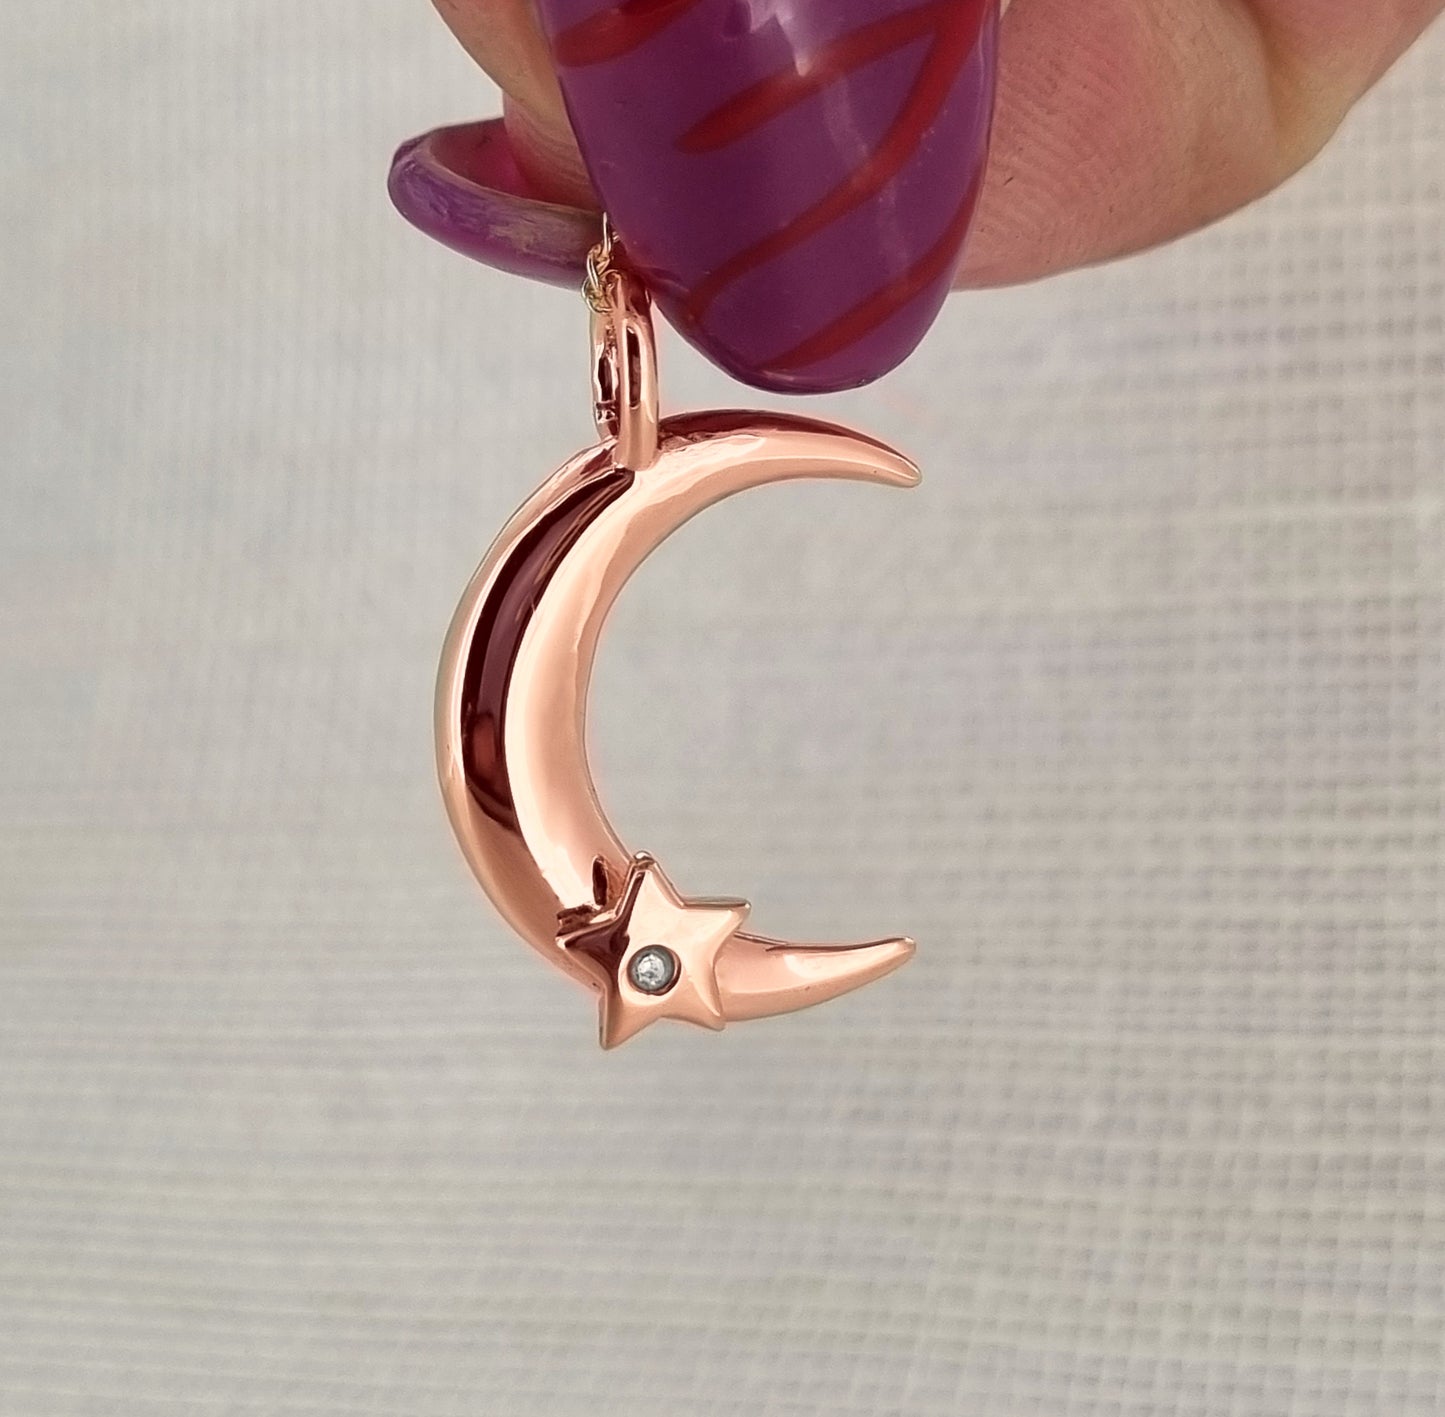 Crescent moon necklace in solid gold or silver